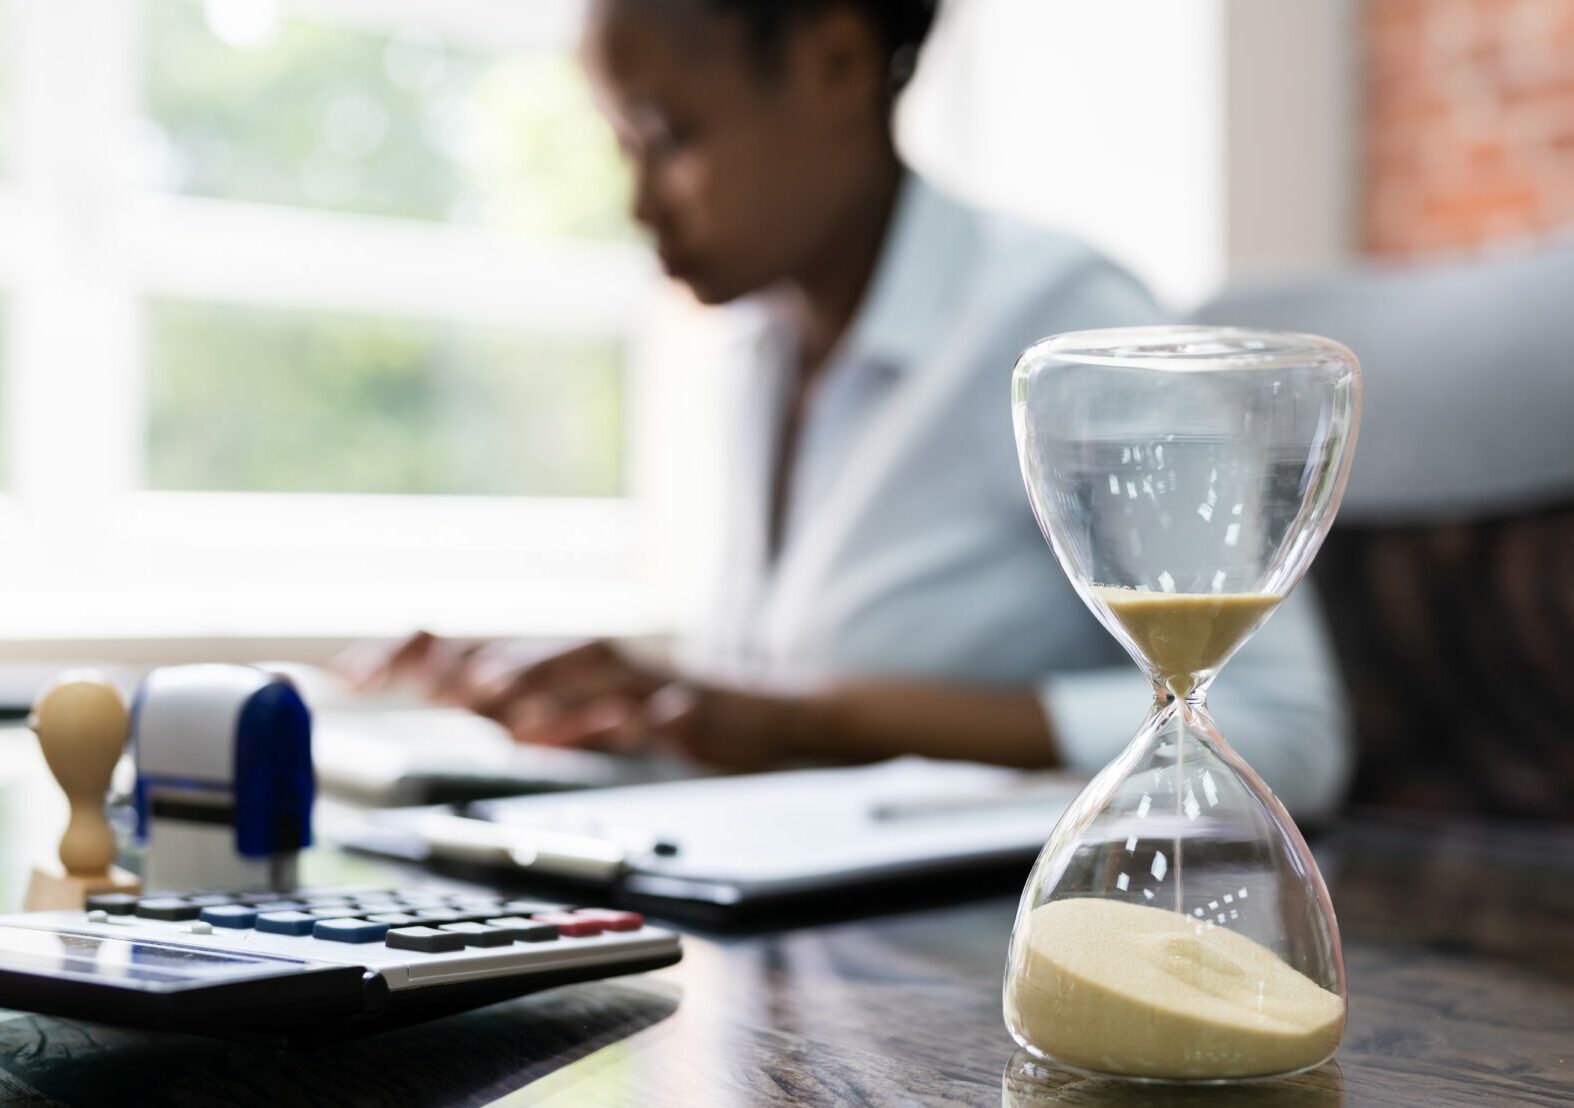 When is the best time to sell your accounting practice?